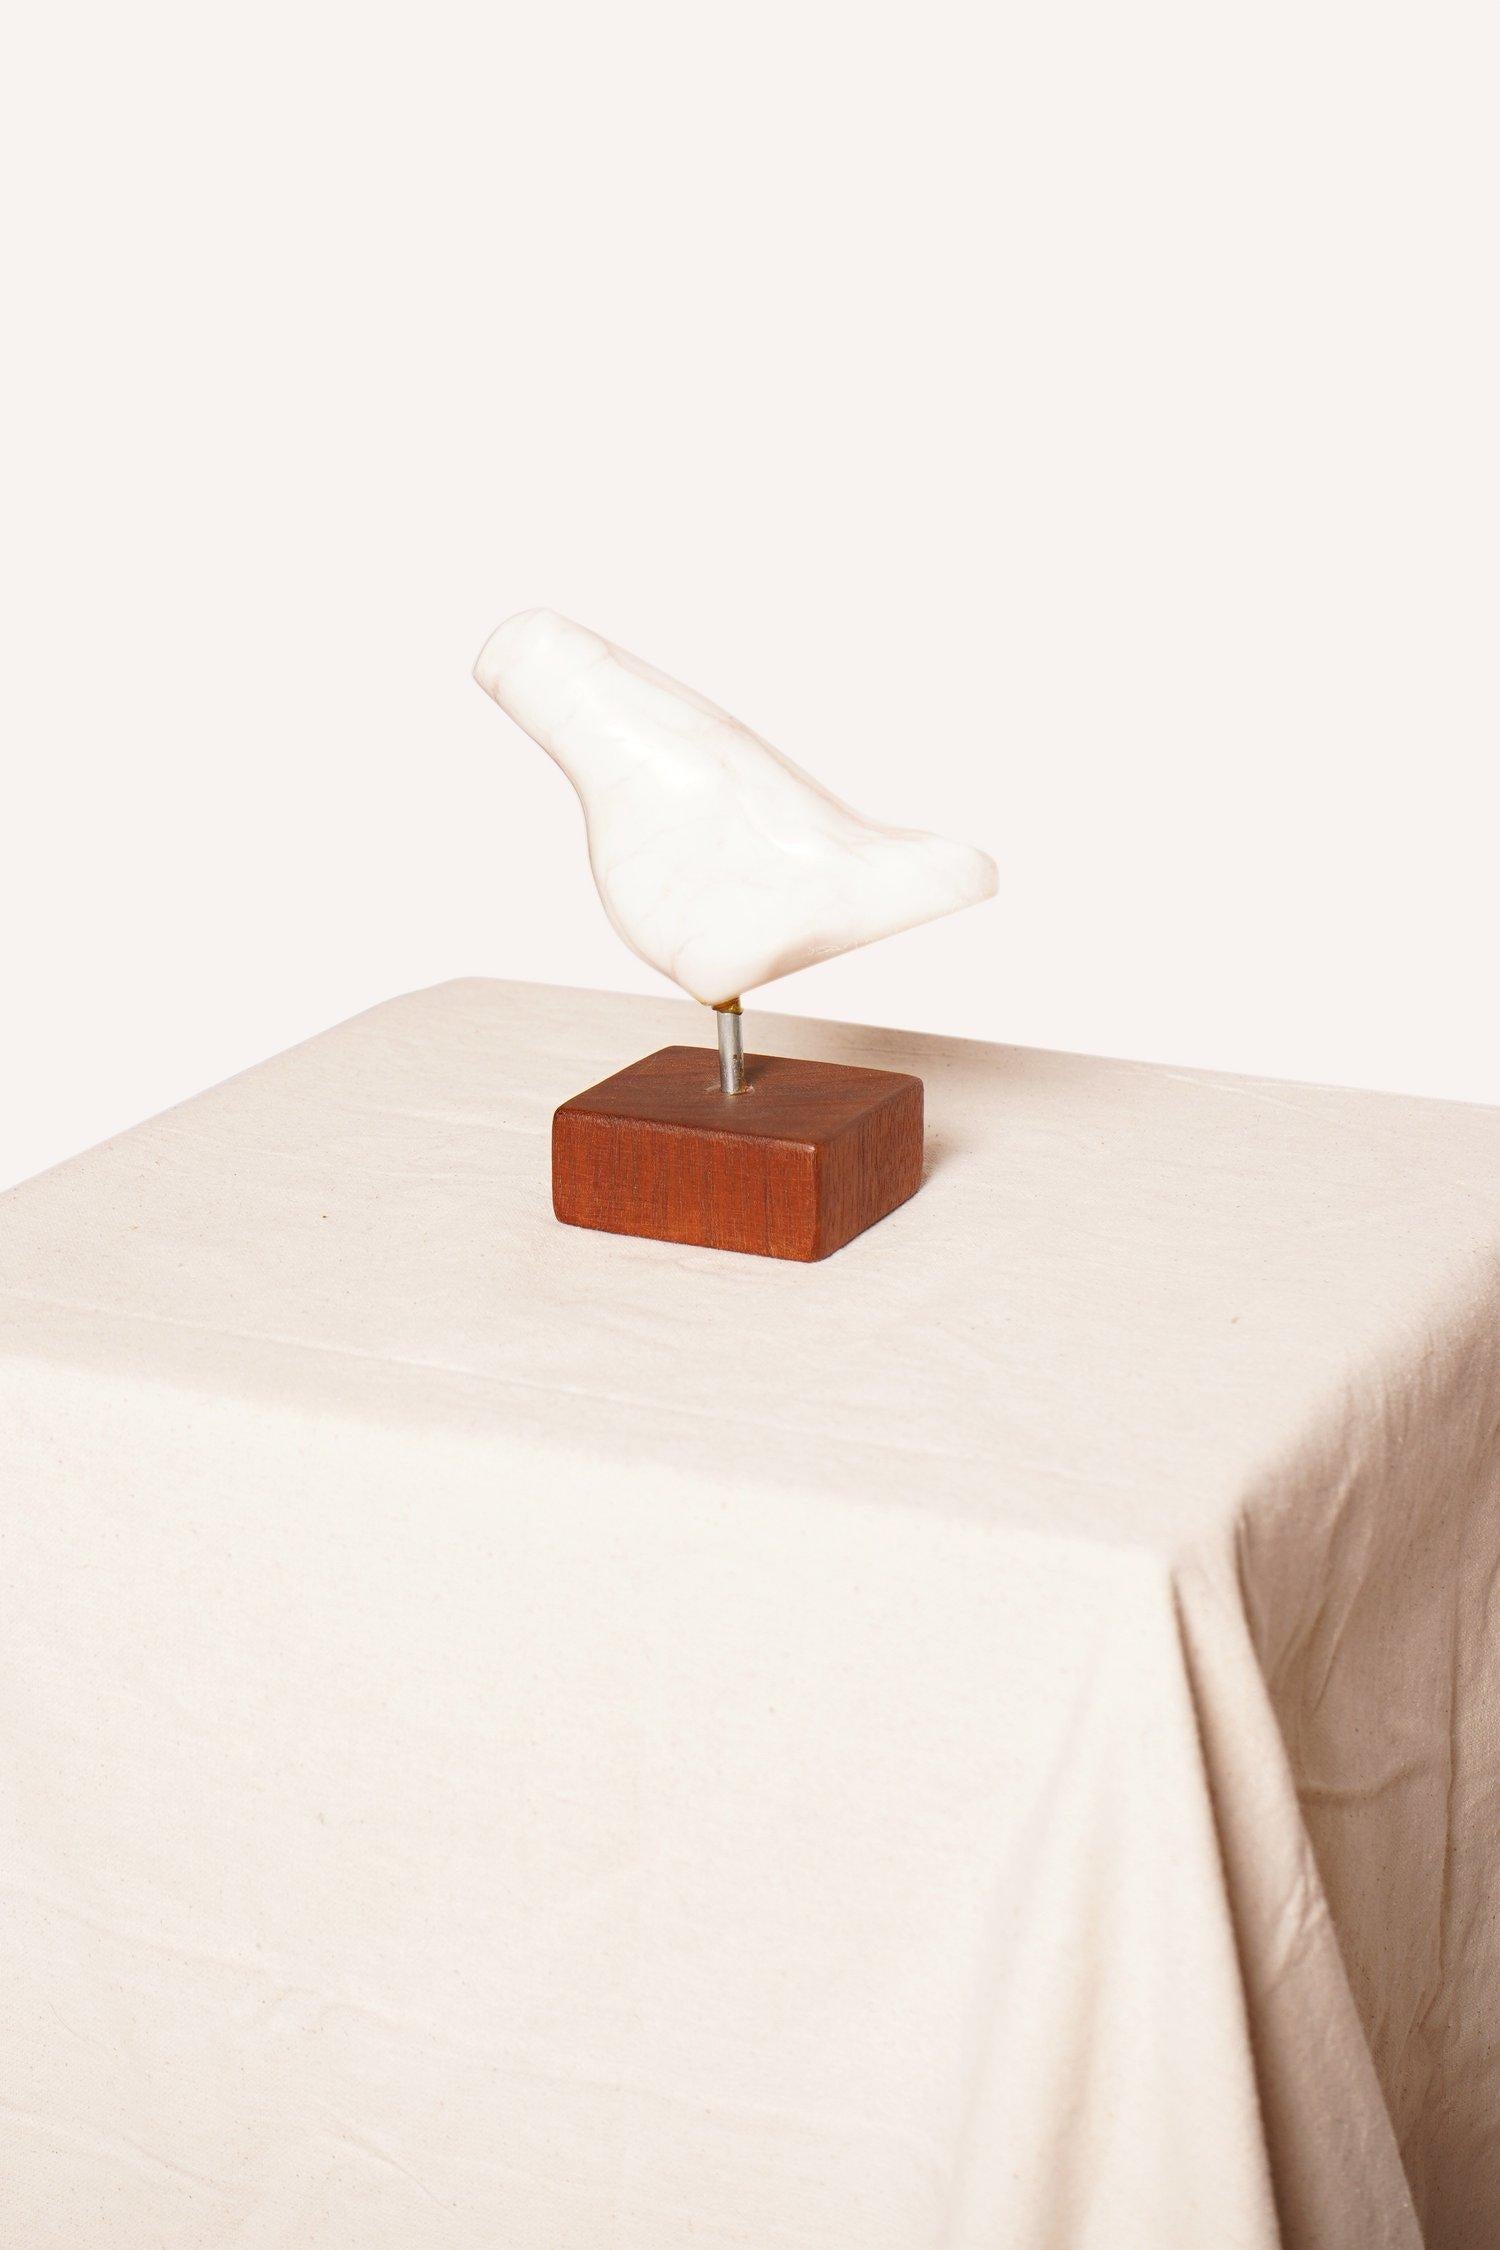 This Joan H. Shapiro carved stone bird sculpture, signed by artist Shapiro whose work was mainly consisted of paintings, drawings, sculpture and collage. There is a modern and lyrical quality to her work.